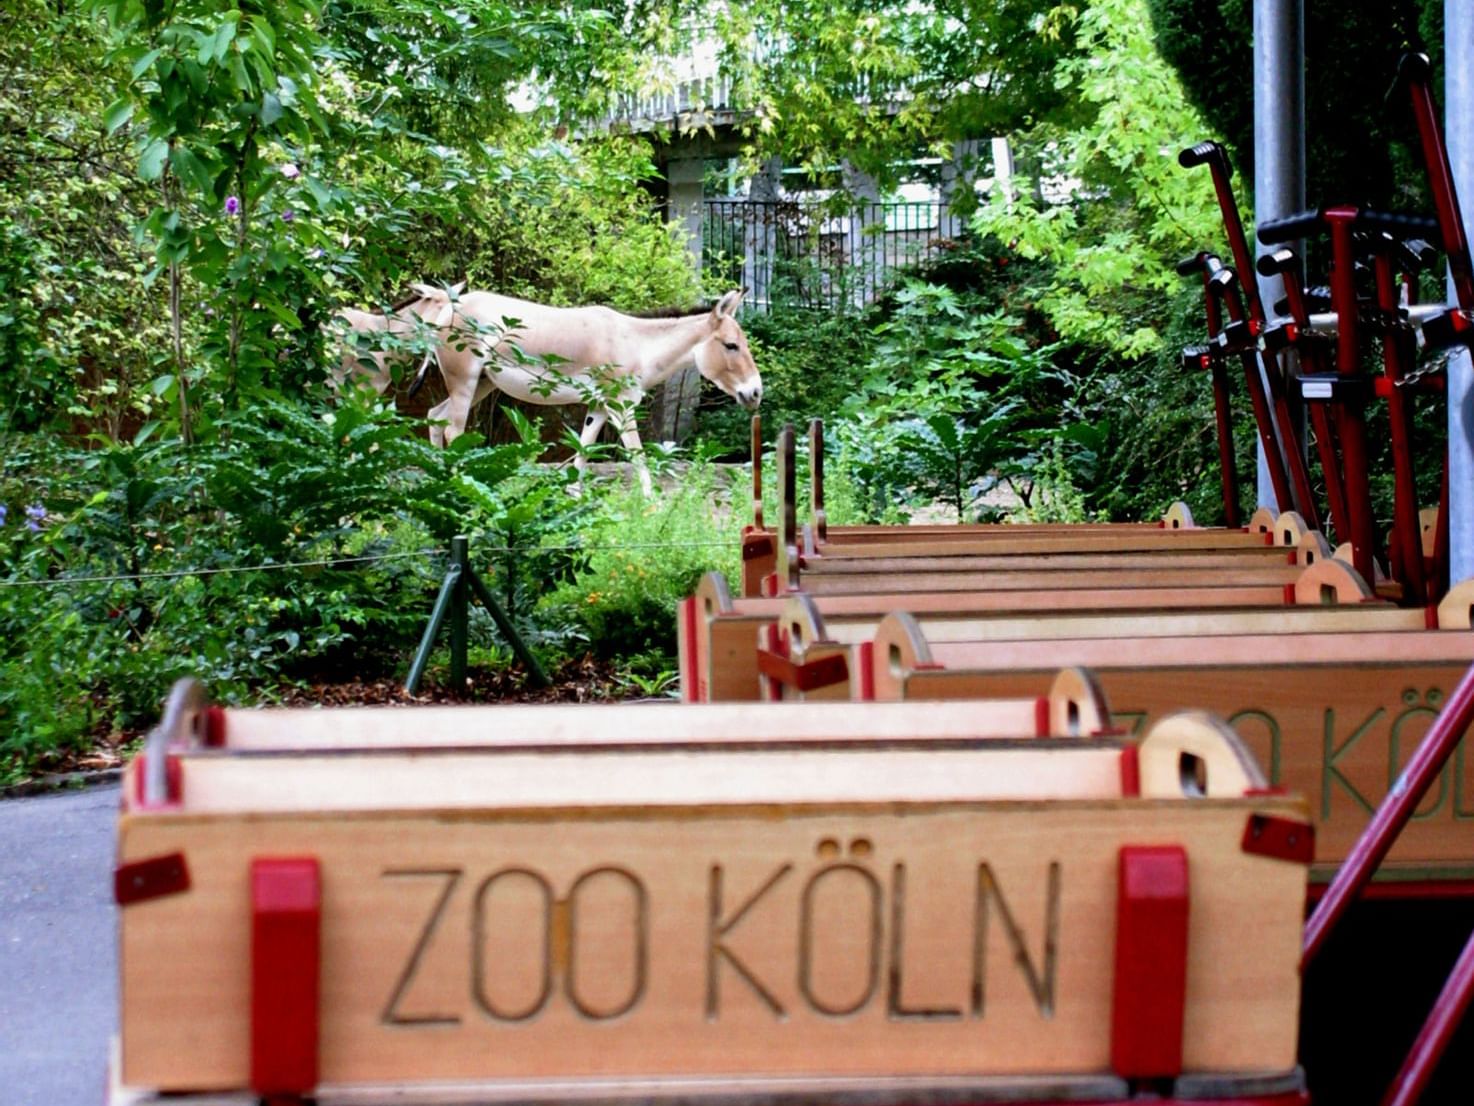 Feed boxes with Zoo Koln's name on them, Classic Hotel Harmonie